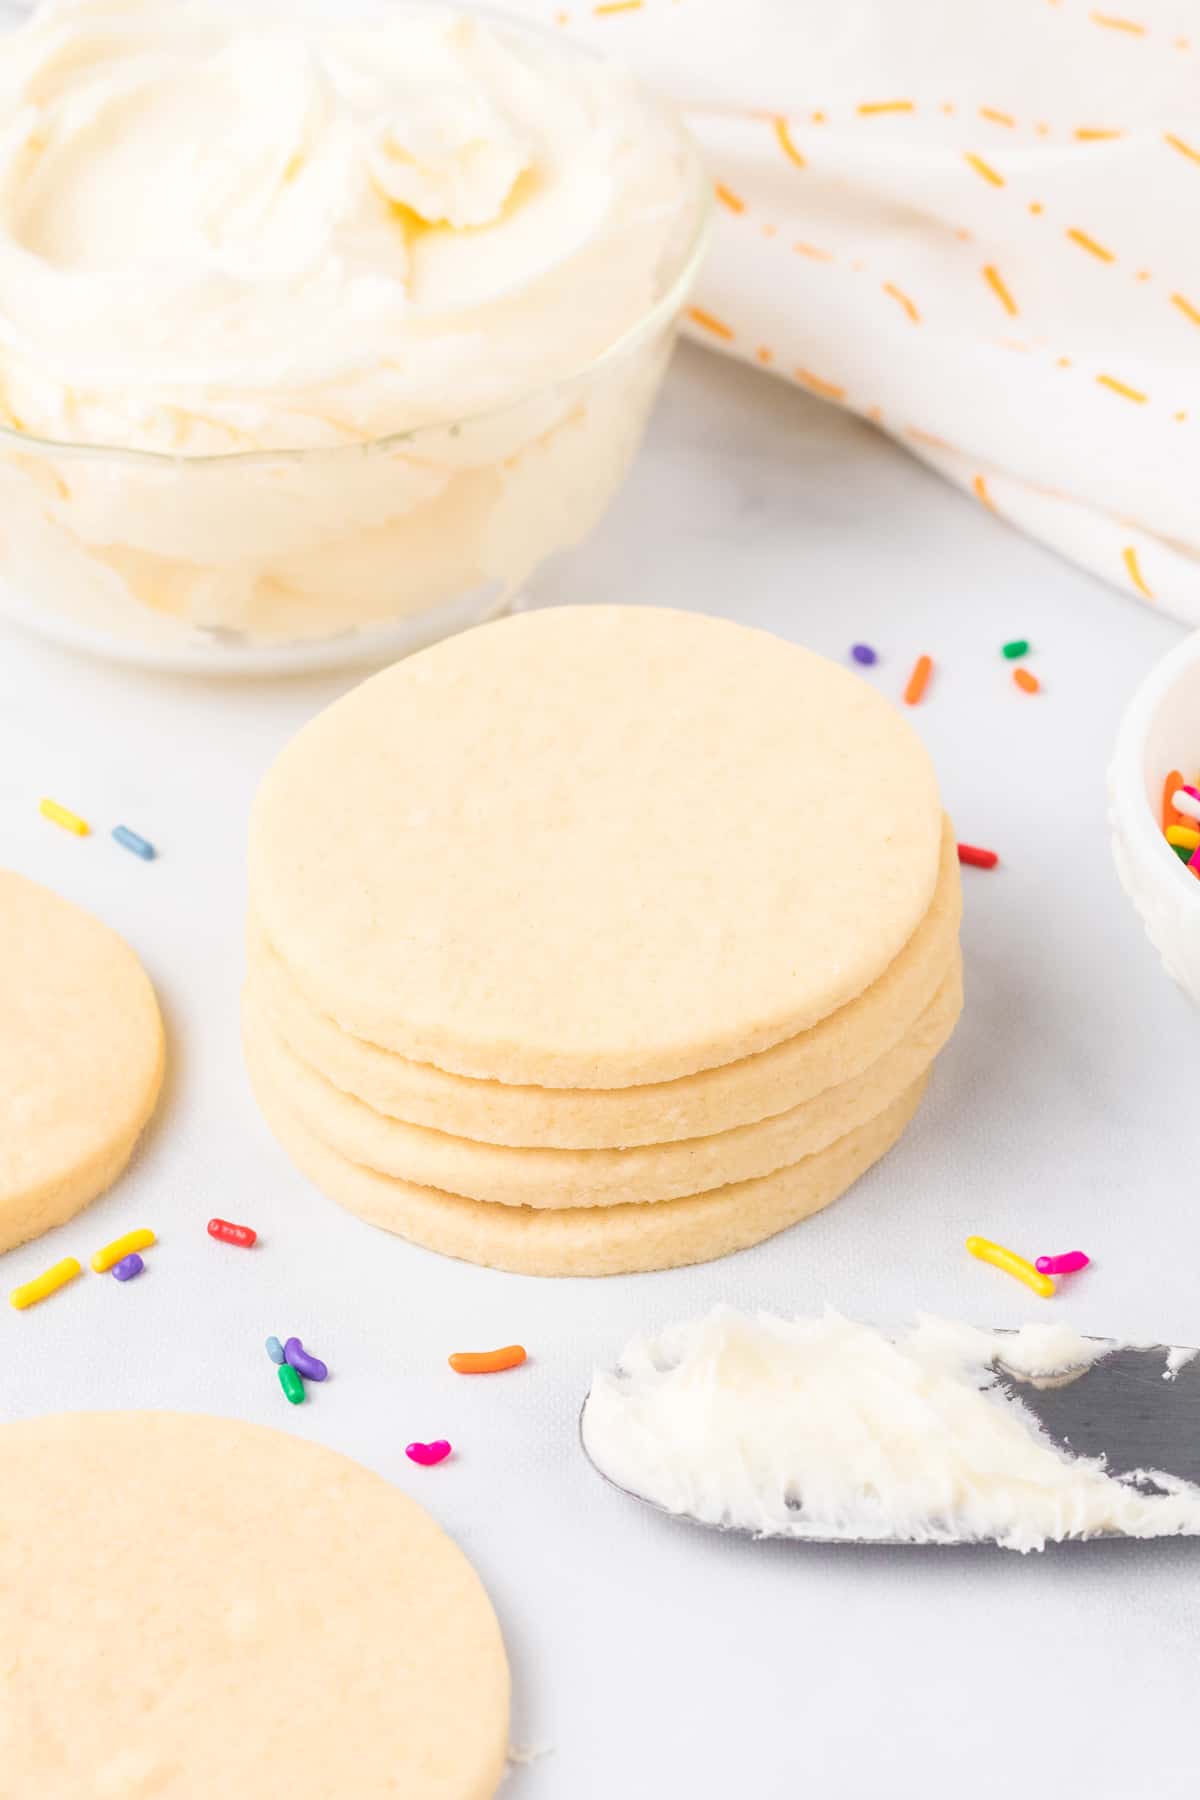 Stacked round sugar cookies nest to a bowl of frosting and a frosting covered knife on a counter from the side.